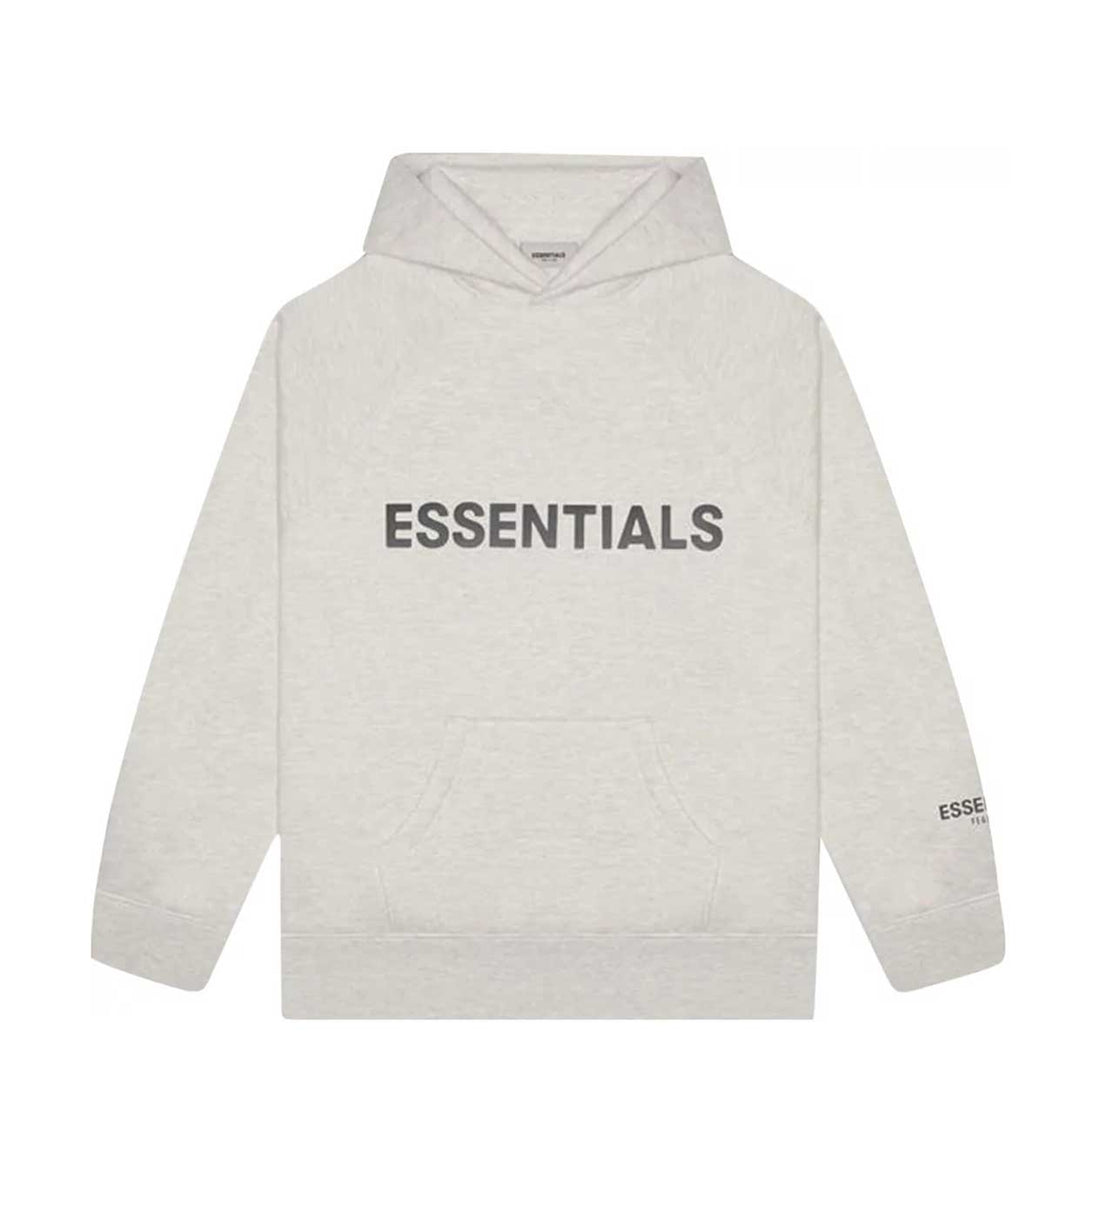 Essentials Oatmeal Hoodie Front Logo